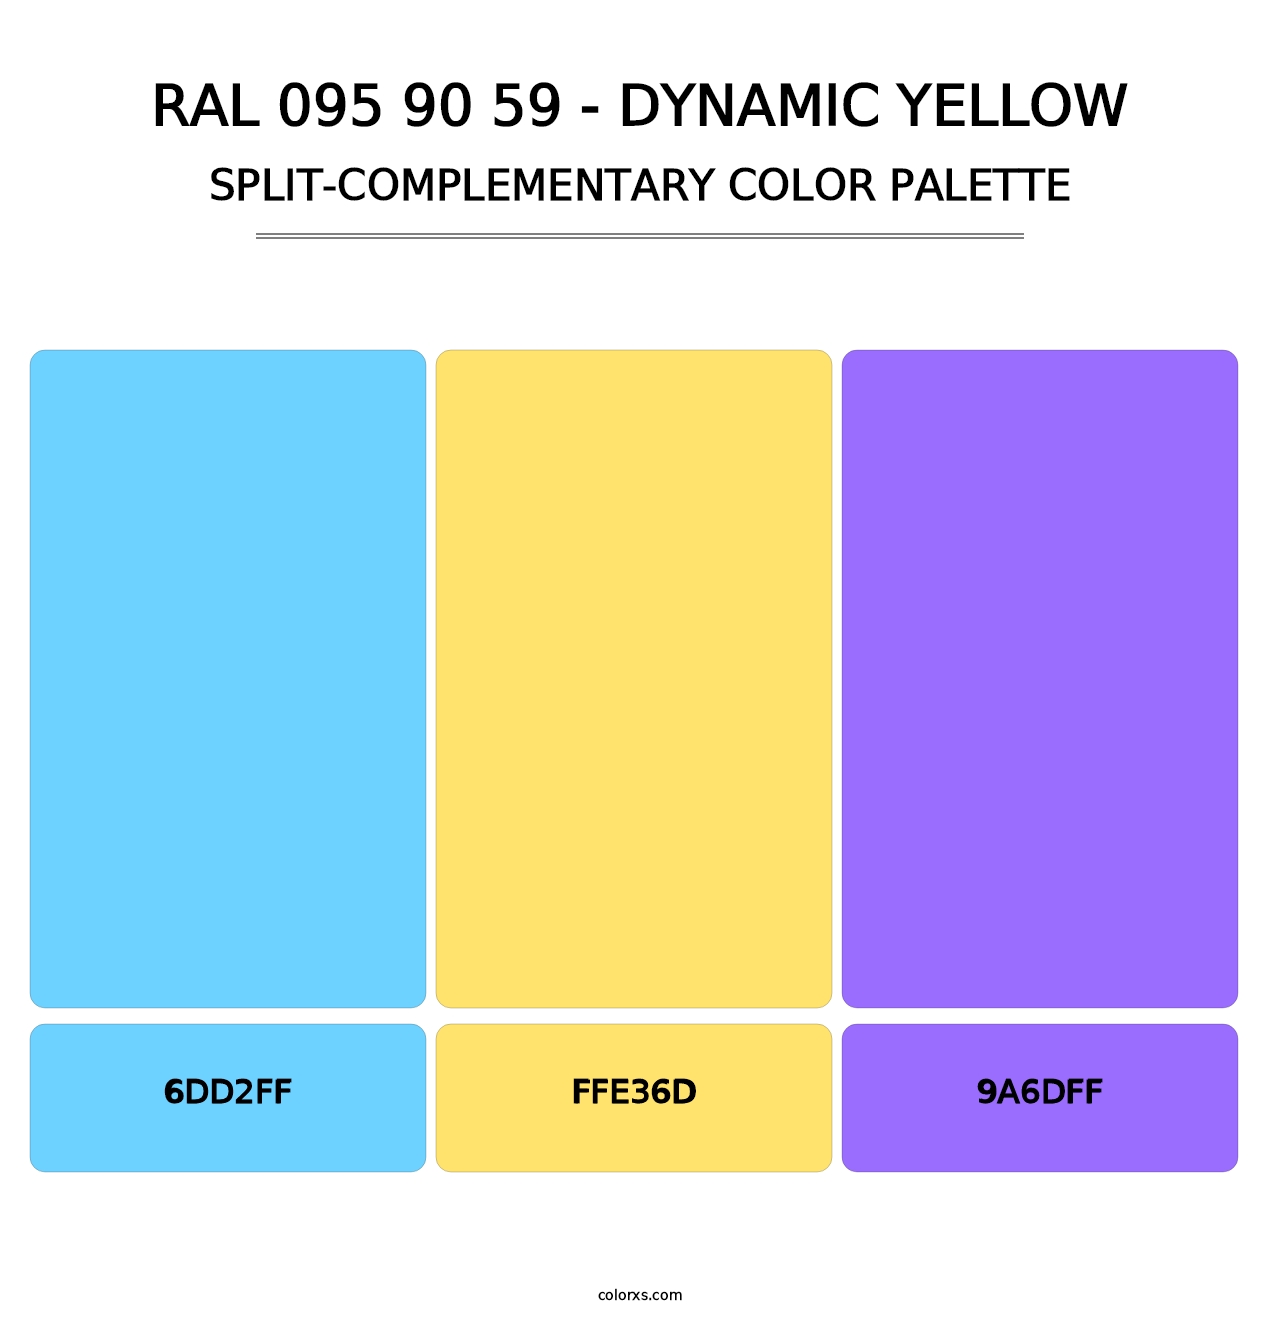 RAL 095 90 59 - Dynamic Yellow - Split-Complementary Color Palette